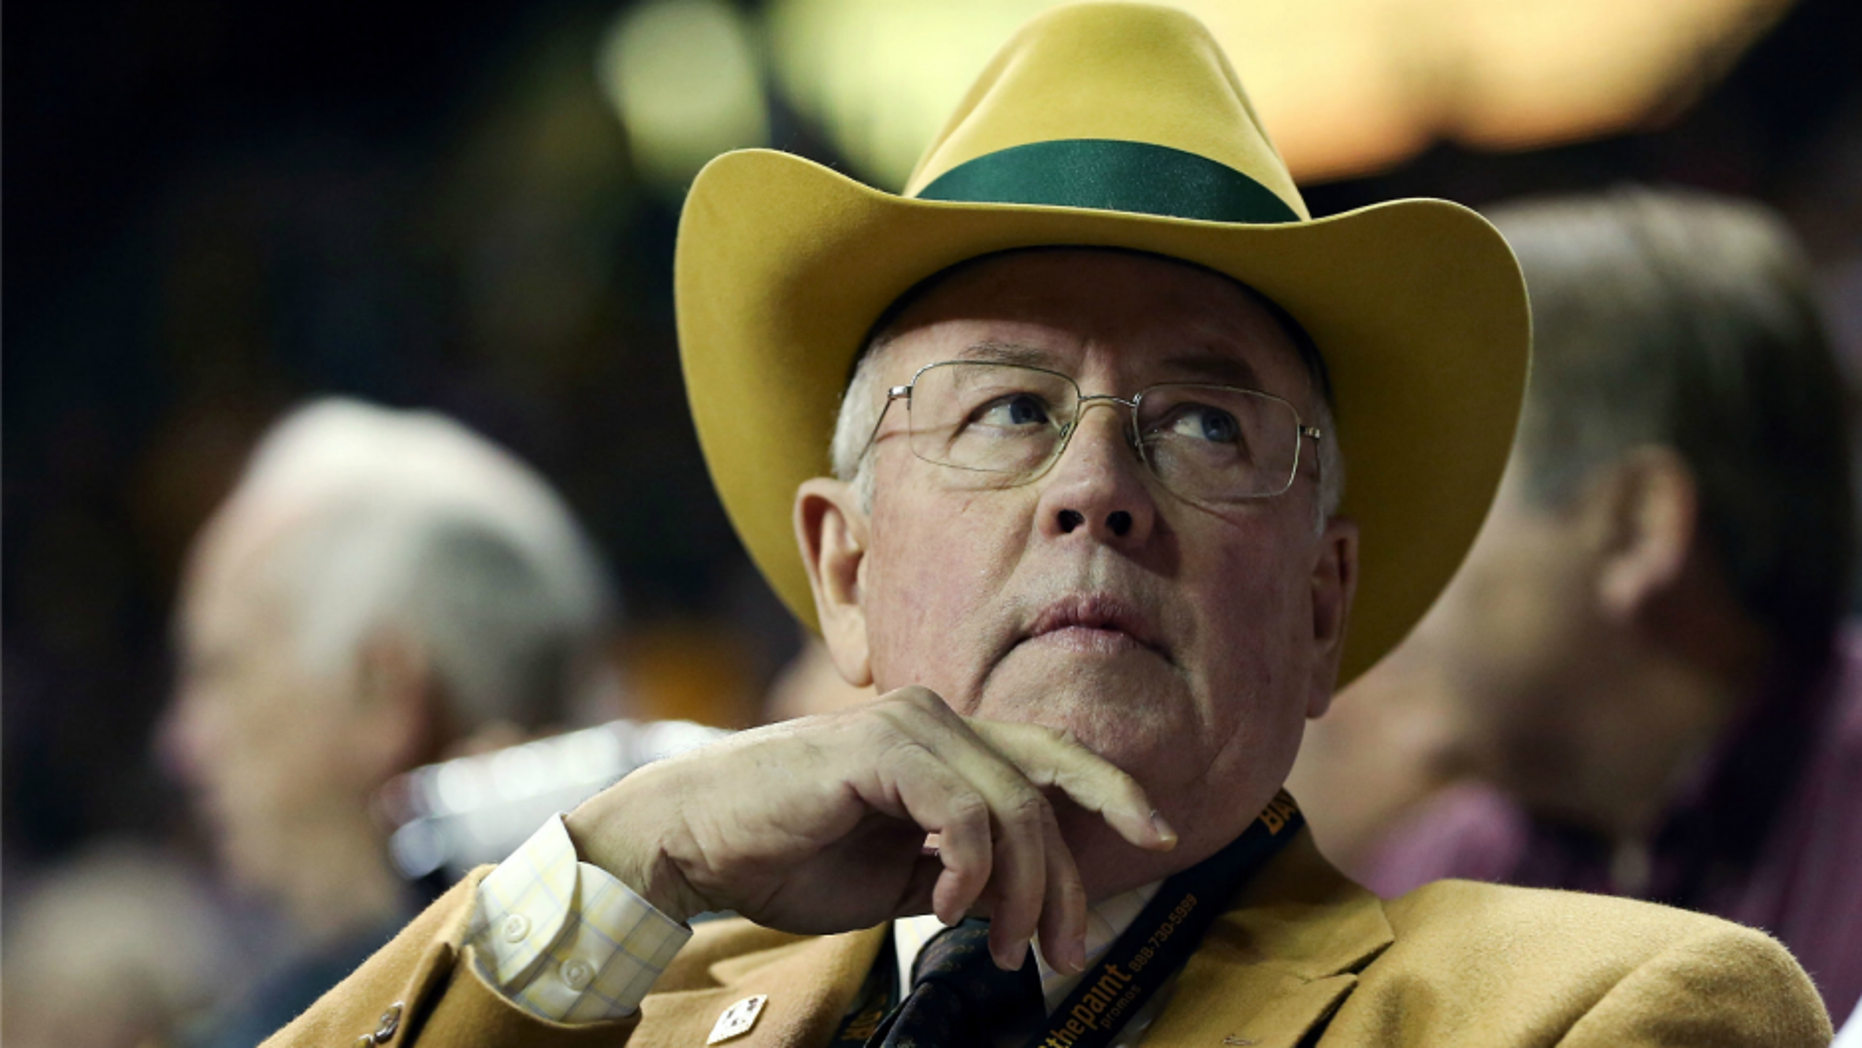 Ken Starr Got Asked About A Baylor Email And It Did Not Go Well For Him